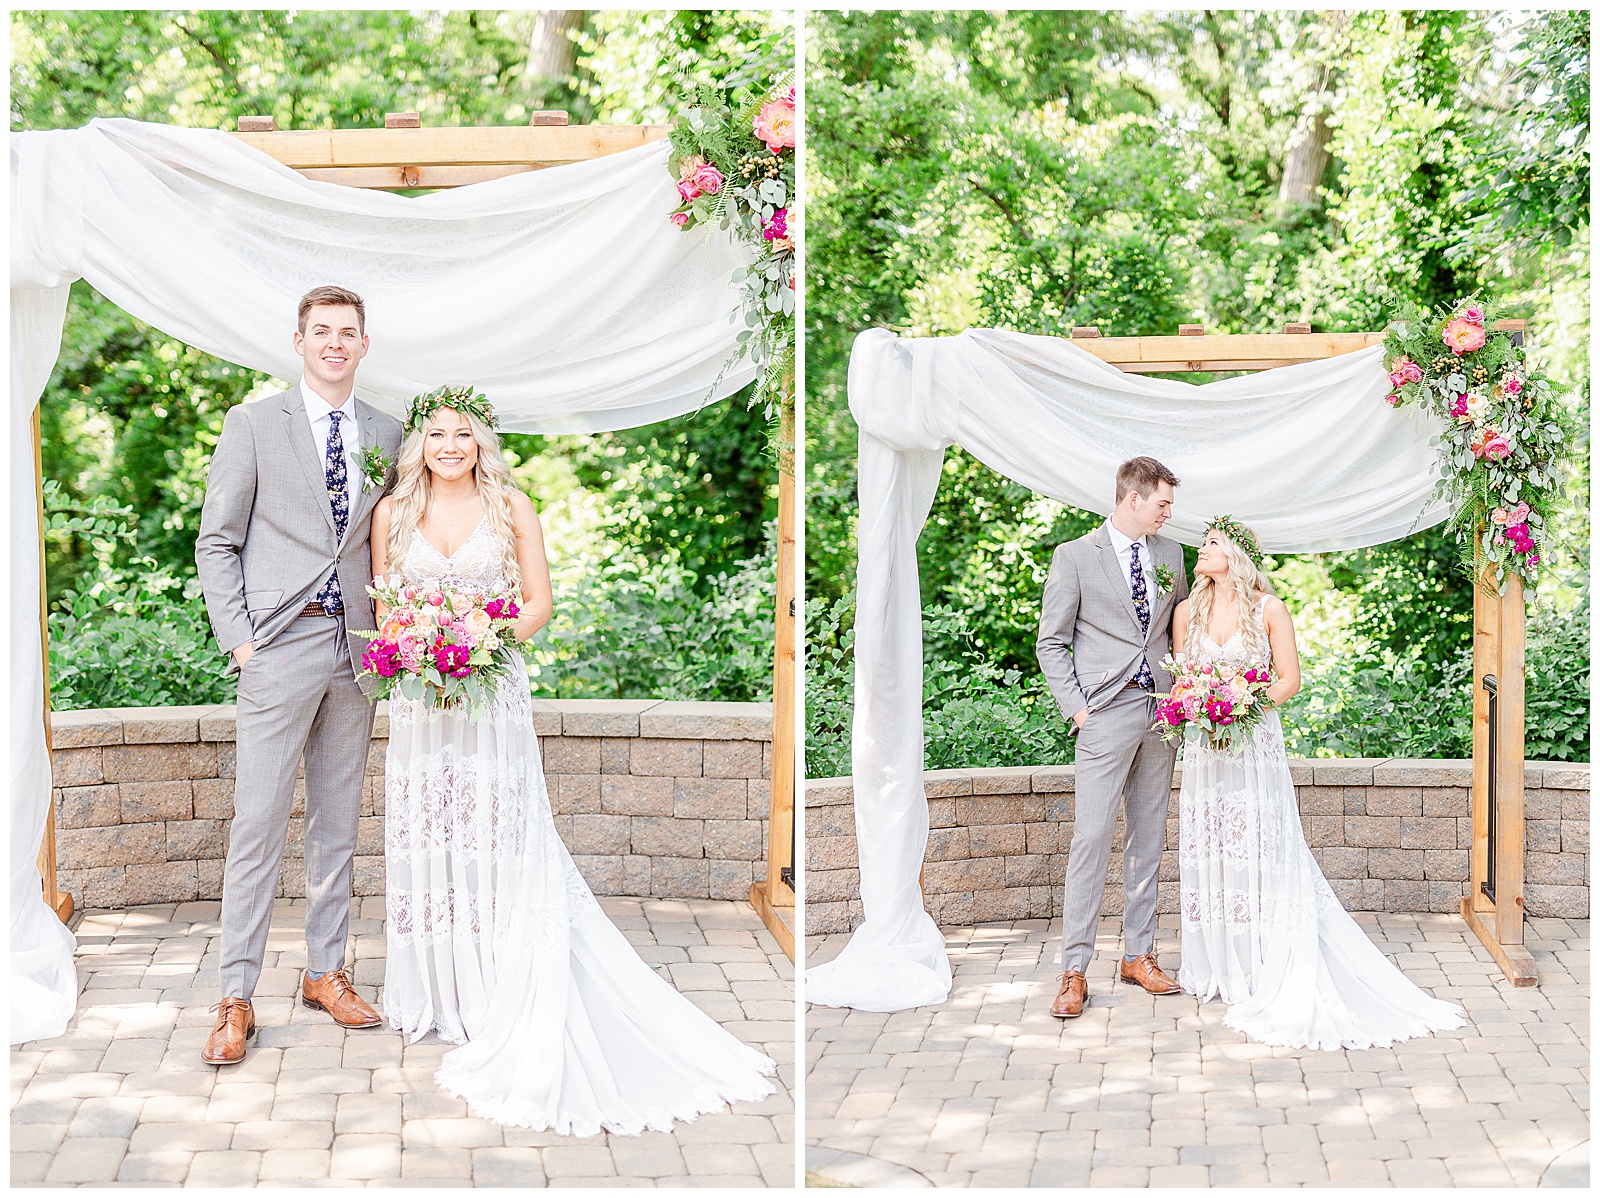 Enchanting Bright Bohemian Flower Arch from Boho Chic Summer Wedding in Charlotte, NC | check out the full wedding at KevynDixonPhoto.com 